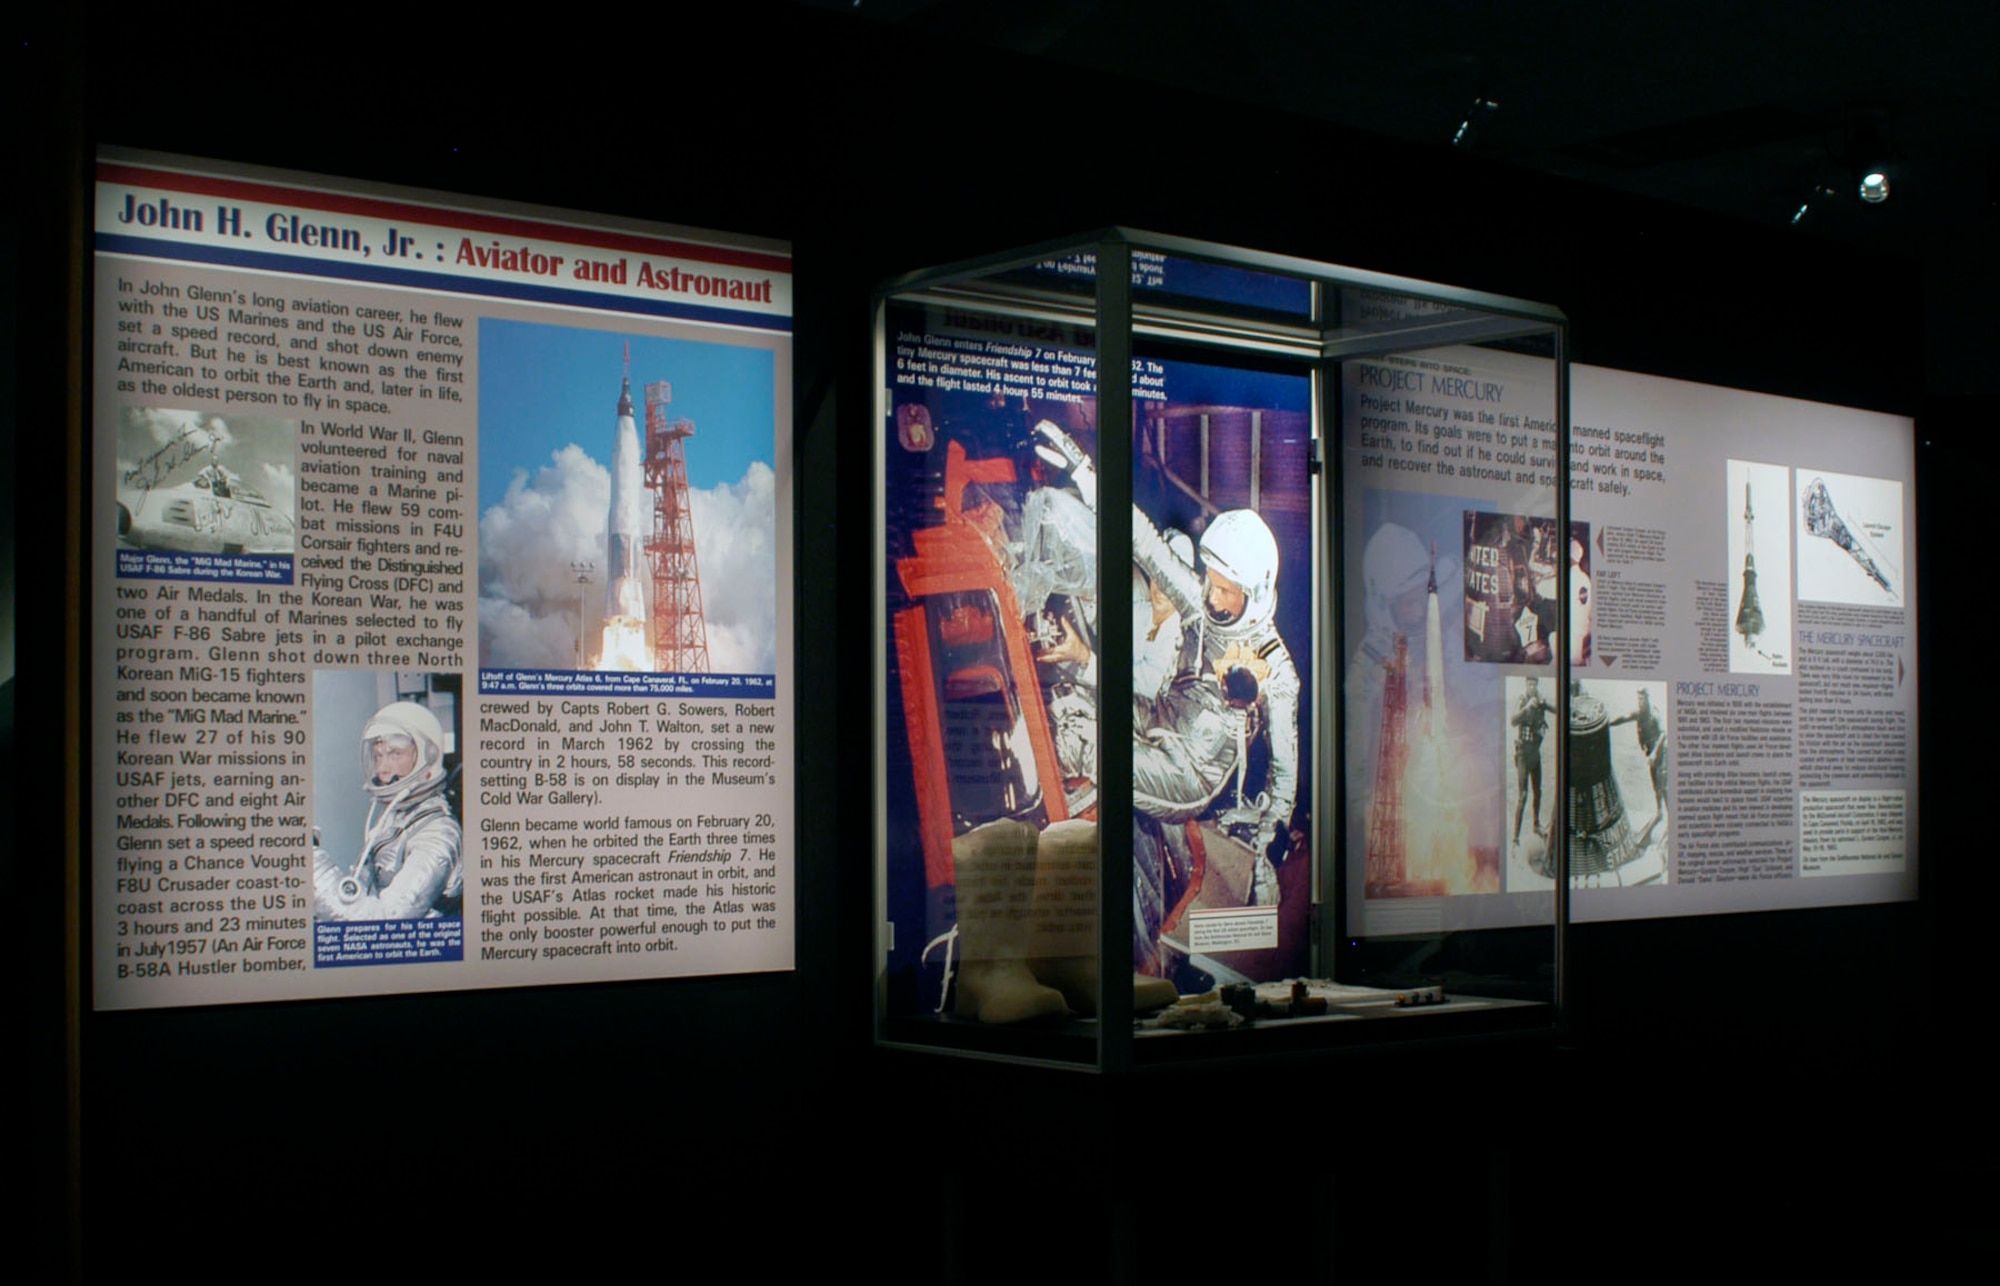 DAYTON, Ohio -- John Glenn exhibit in the Missile & Space Gallery at the National Museum of the United States Air Force. The exhibit features several items carried by Glenn aboard the Friendship 7 during the first U.S. orbital spaceflight. (U.S. Air Force photo)